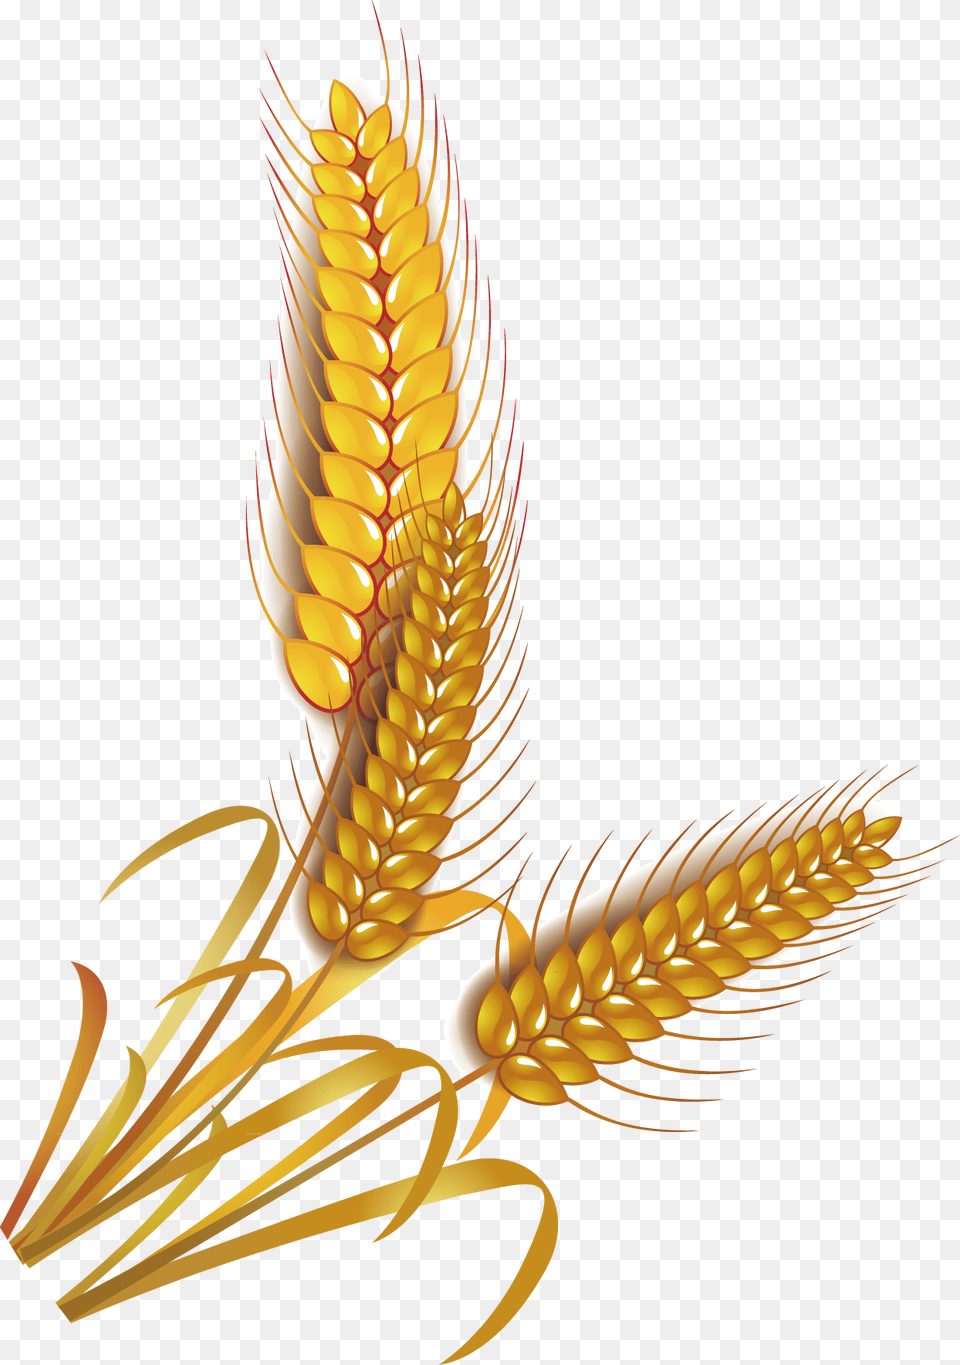 Wheat Rice Cereal Whole Grain Clip Art Grain Rice Vector, Food, Produce, Chandelier, Lamp Png